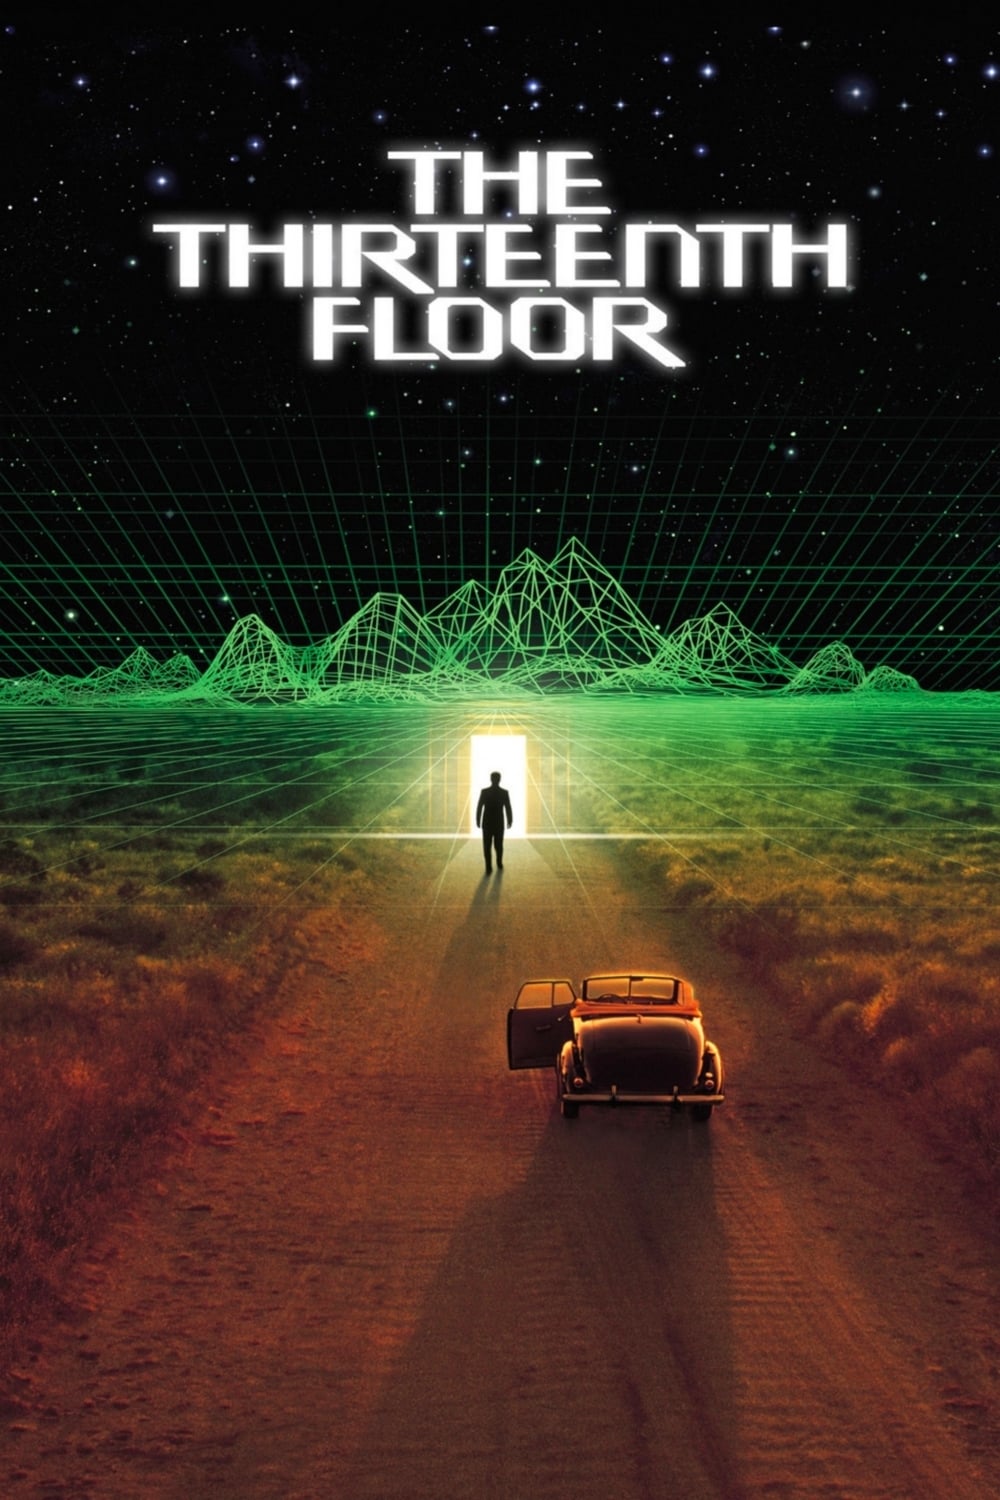 Poster for the movie "The Thirteenth Floor"